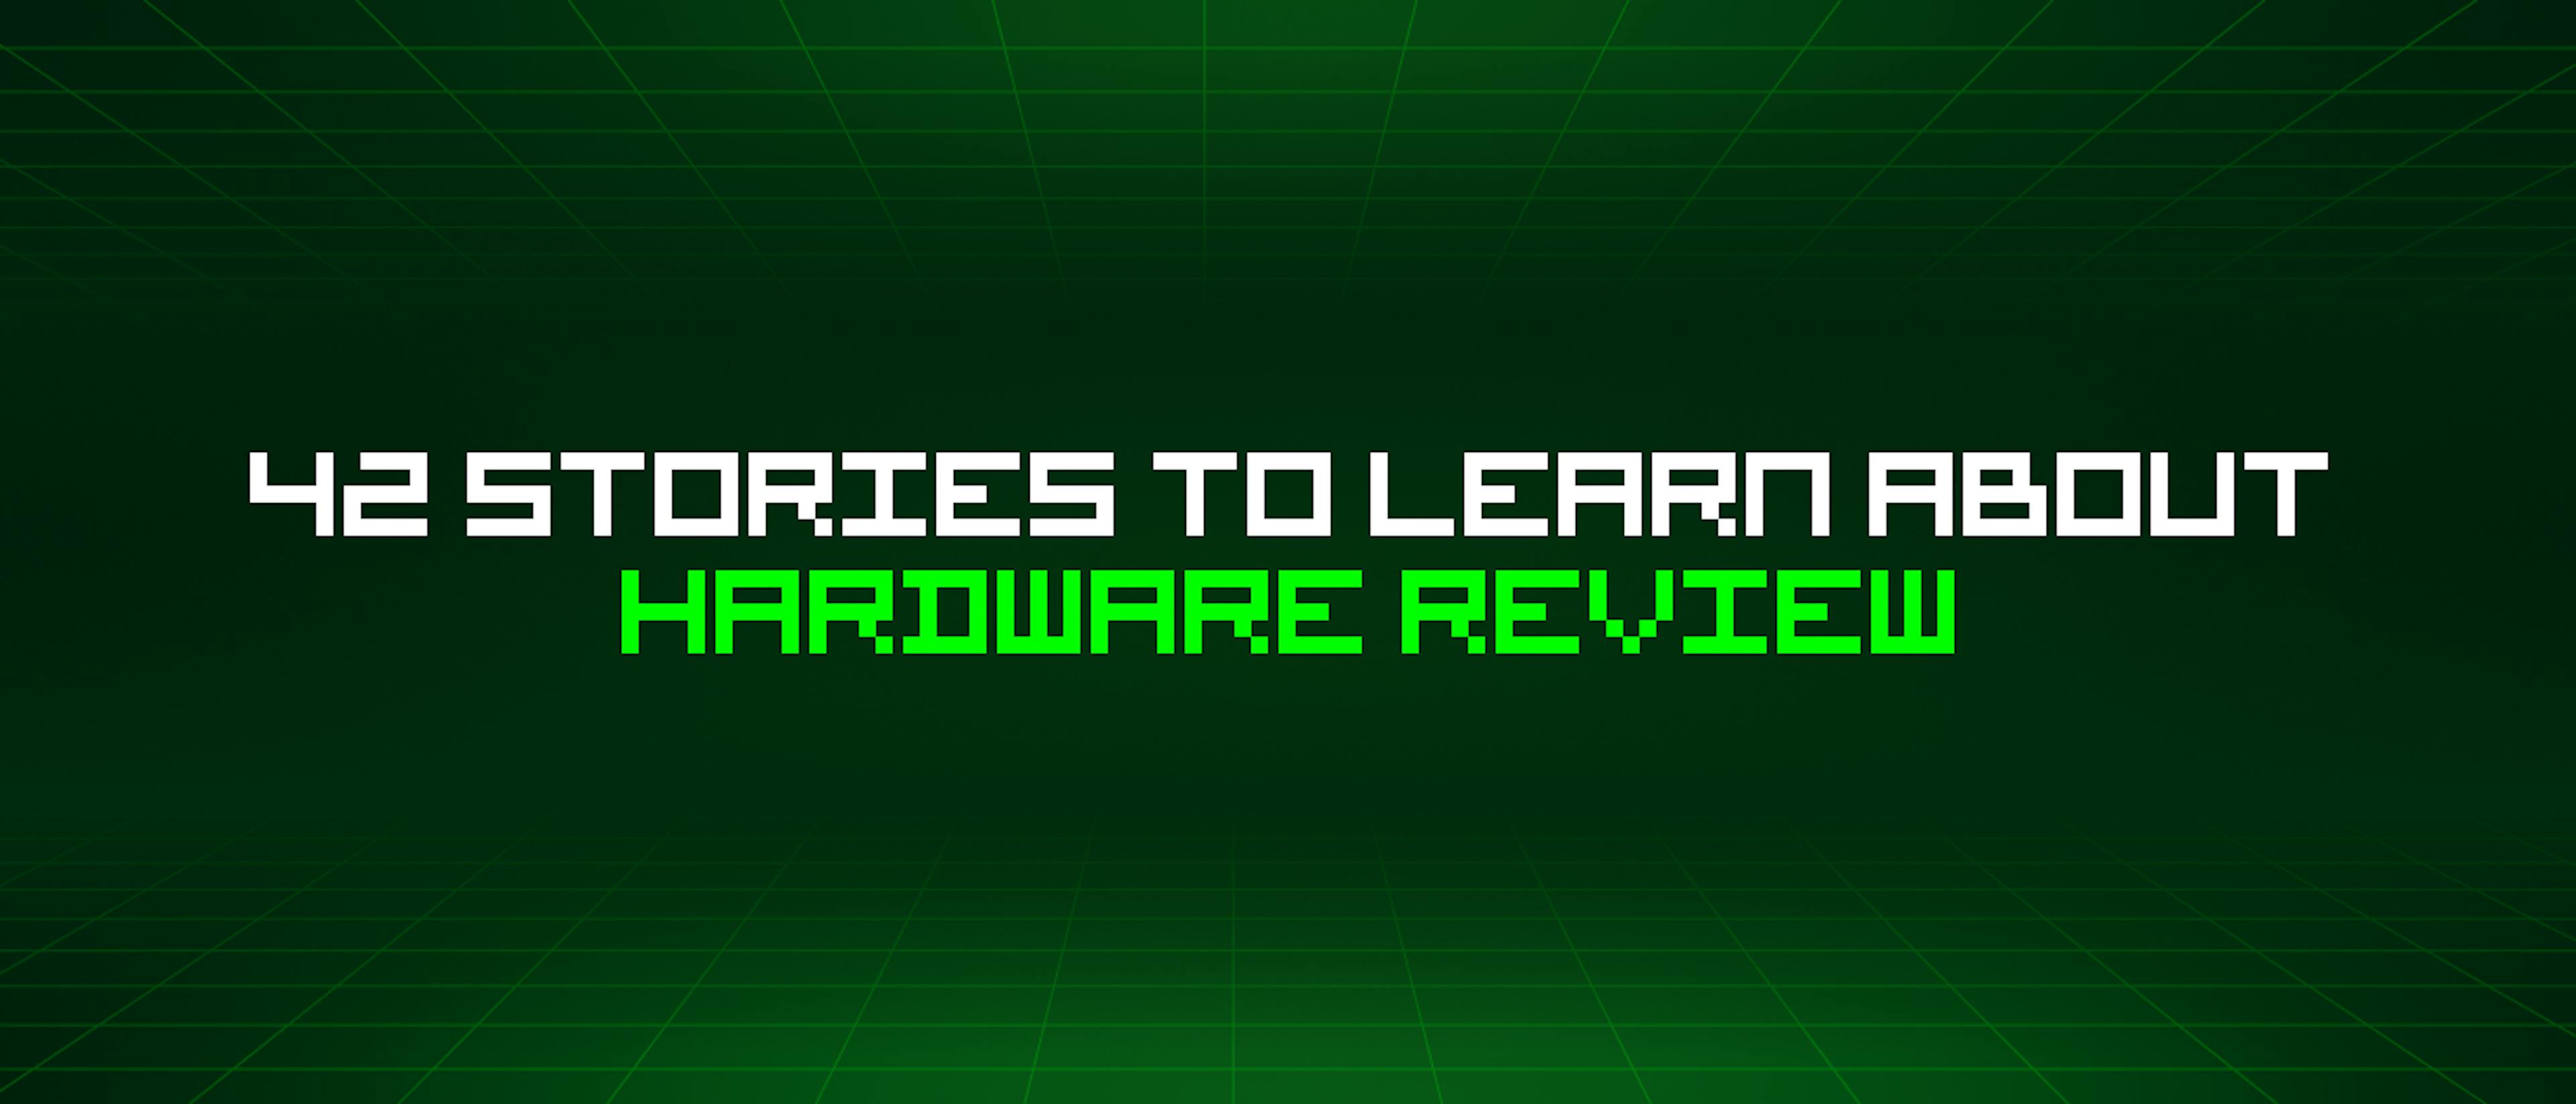 featured image - 42 Stories To Learn About Hardware Review